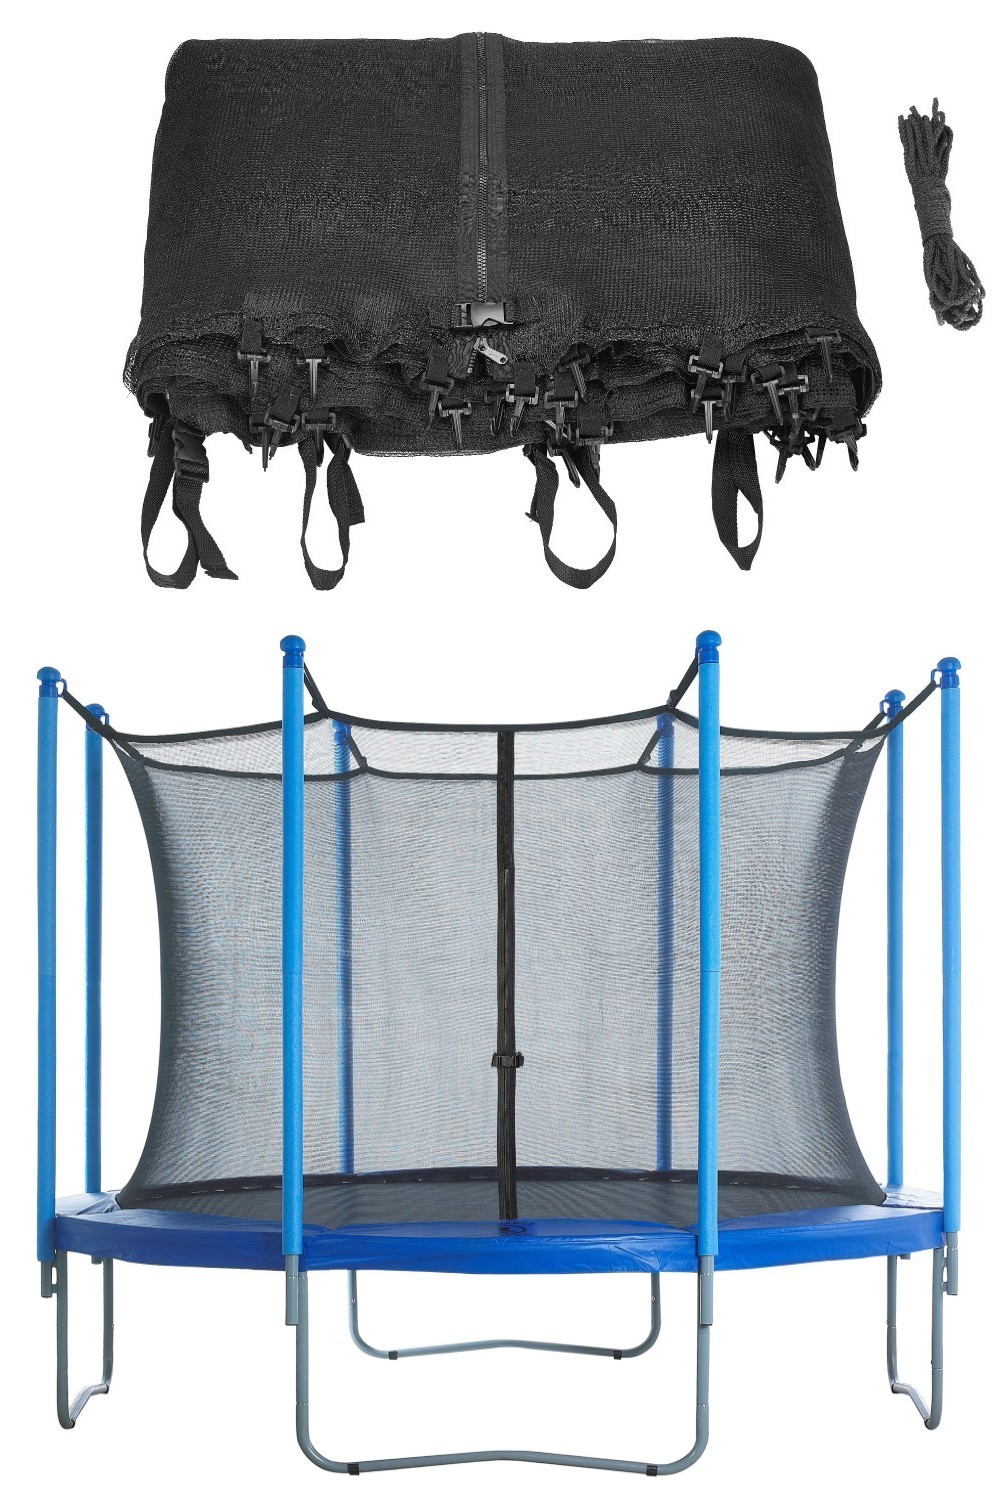 Trampoline Replacement Enclosure Safety Net, fits for 13 FT. Round Frames using 8 Poles or 4 Arches - Net Only